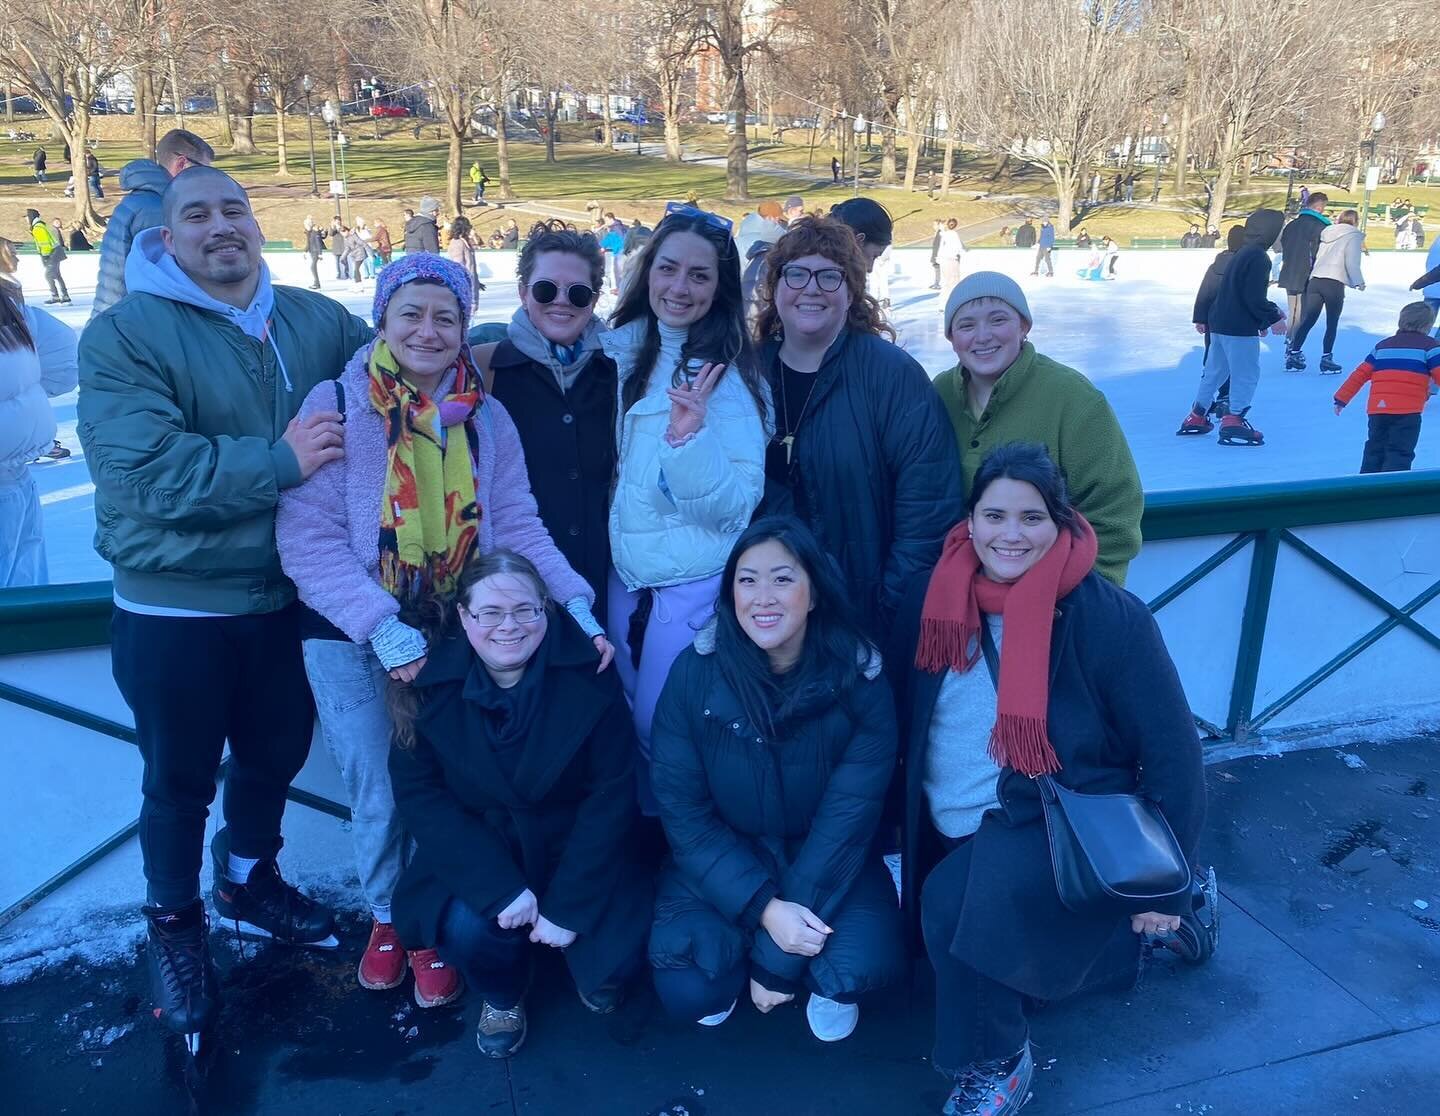 ❄️⛸️skating was scary and fun!!⛸️❄️

Thanks for coming out and doing nice Boston winter things 🥹💕

The cutest part of this field trip is it that it&rsquo;s the first time that ppl that we both (Luis &amp; I) work with hung out together. The new spa